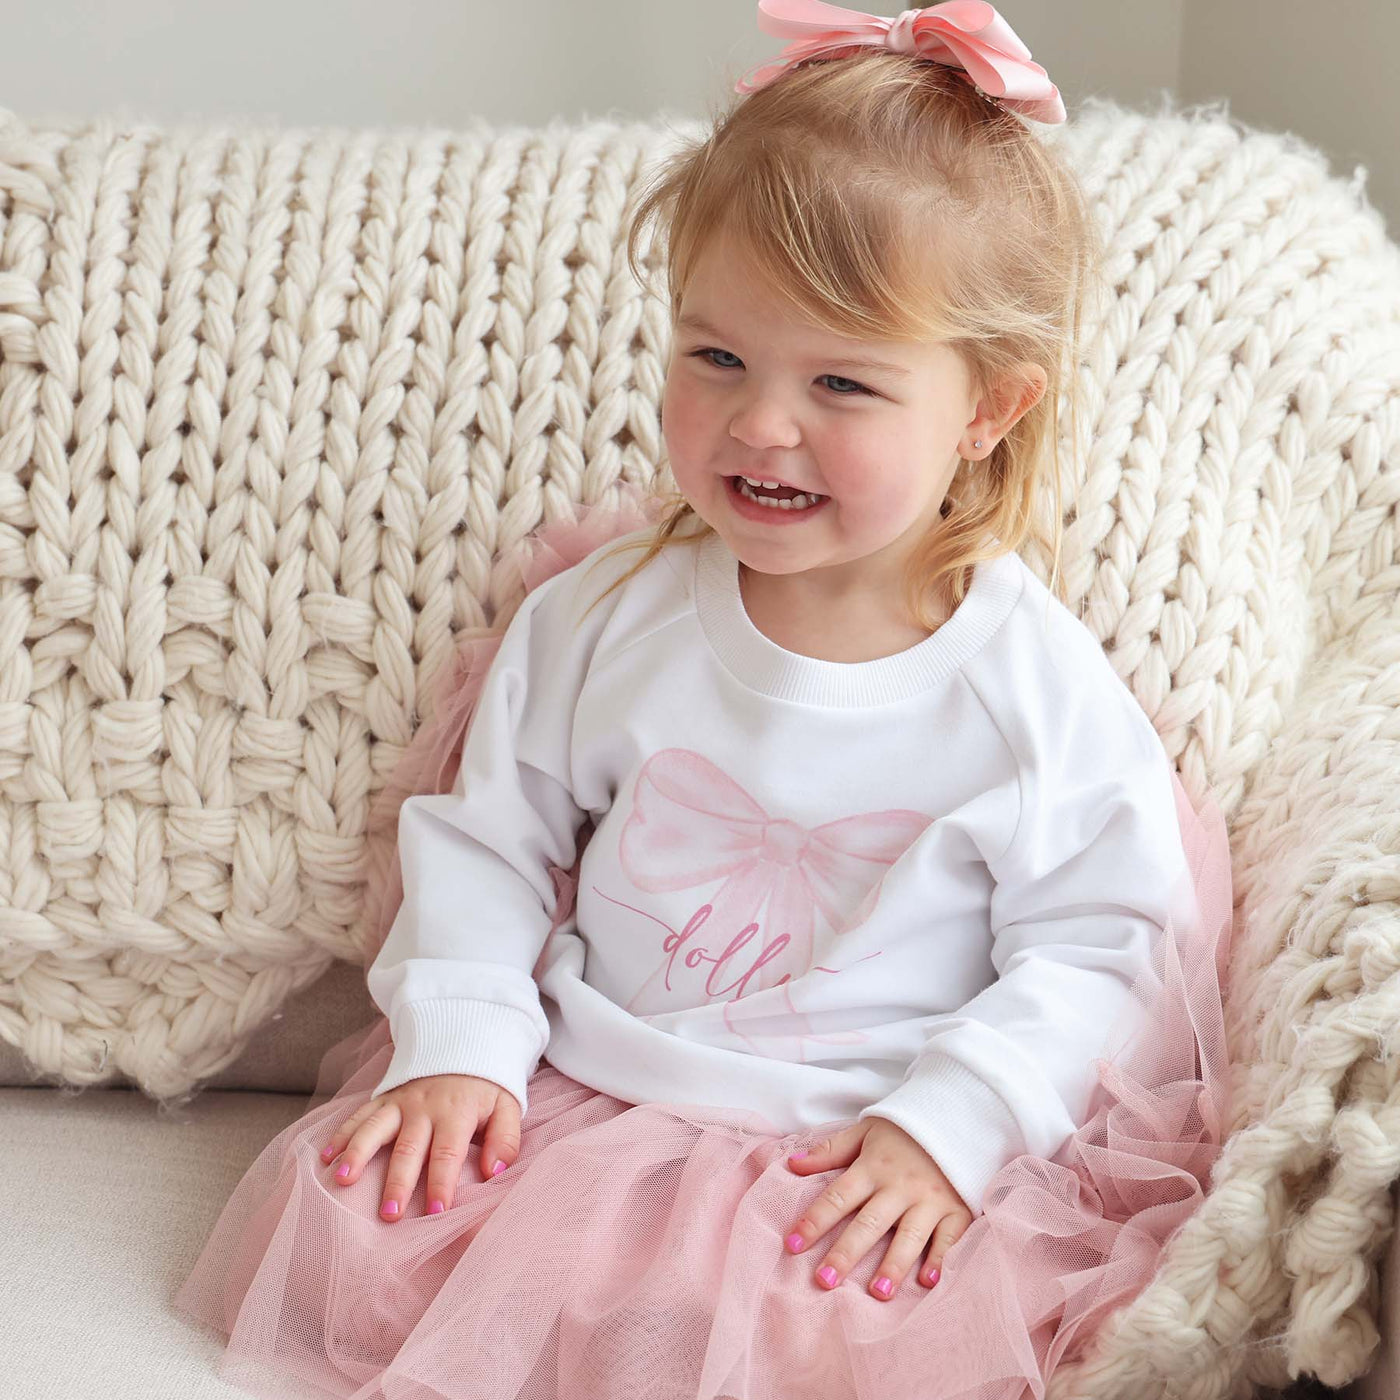 personalized name sweatshirt for kids with bow 